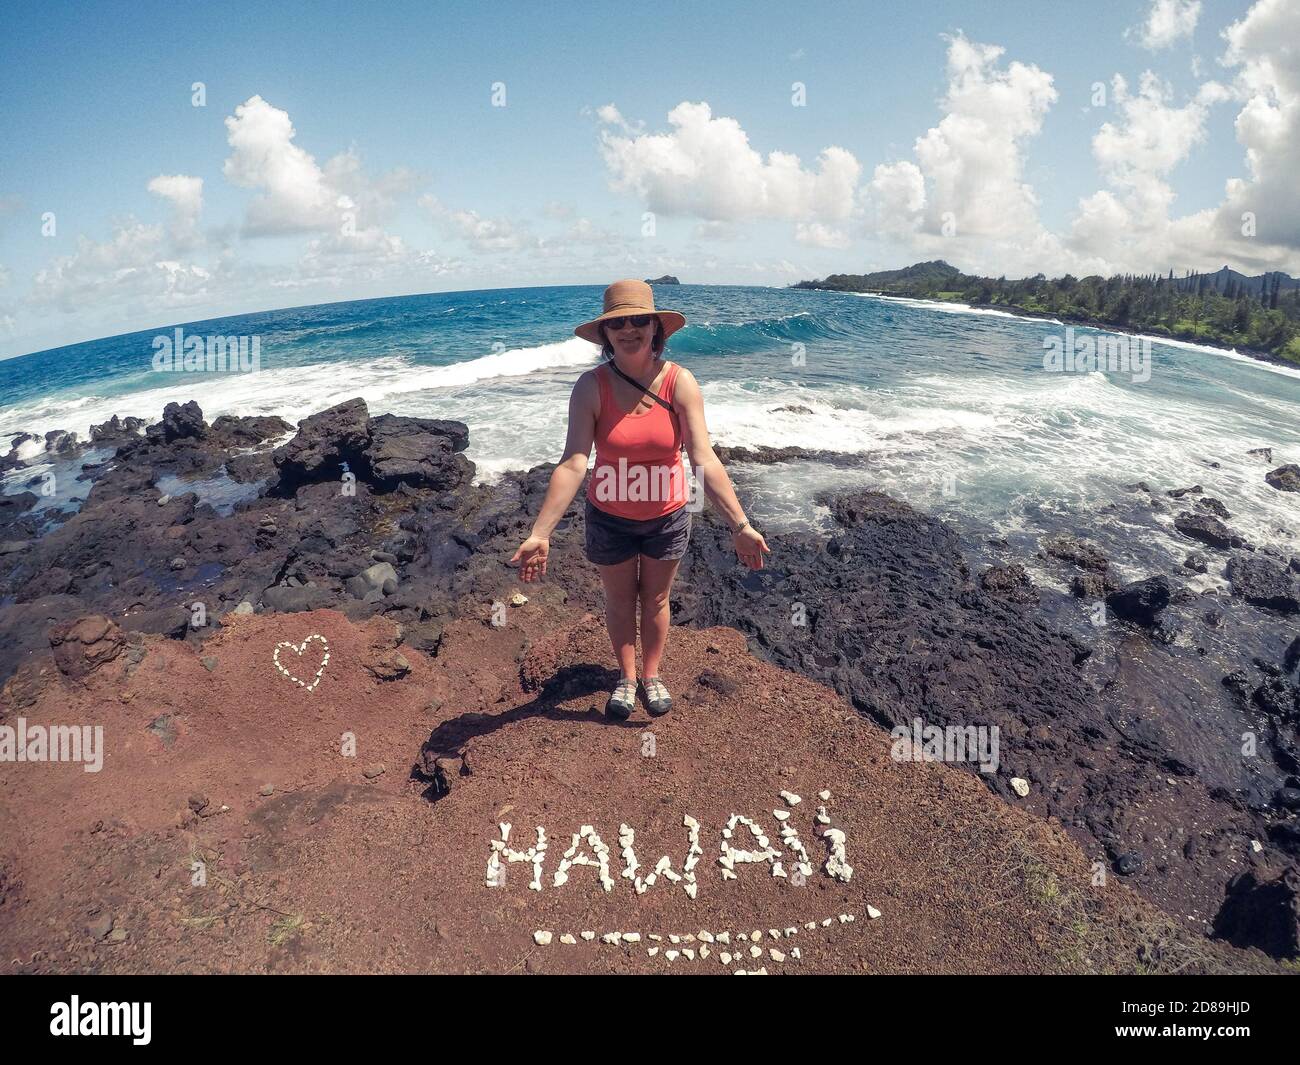 Smiling woman standing by ocean with rocks spelling word Hawaii, Hawaii, USA Stock Photo